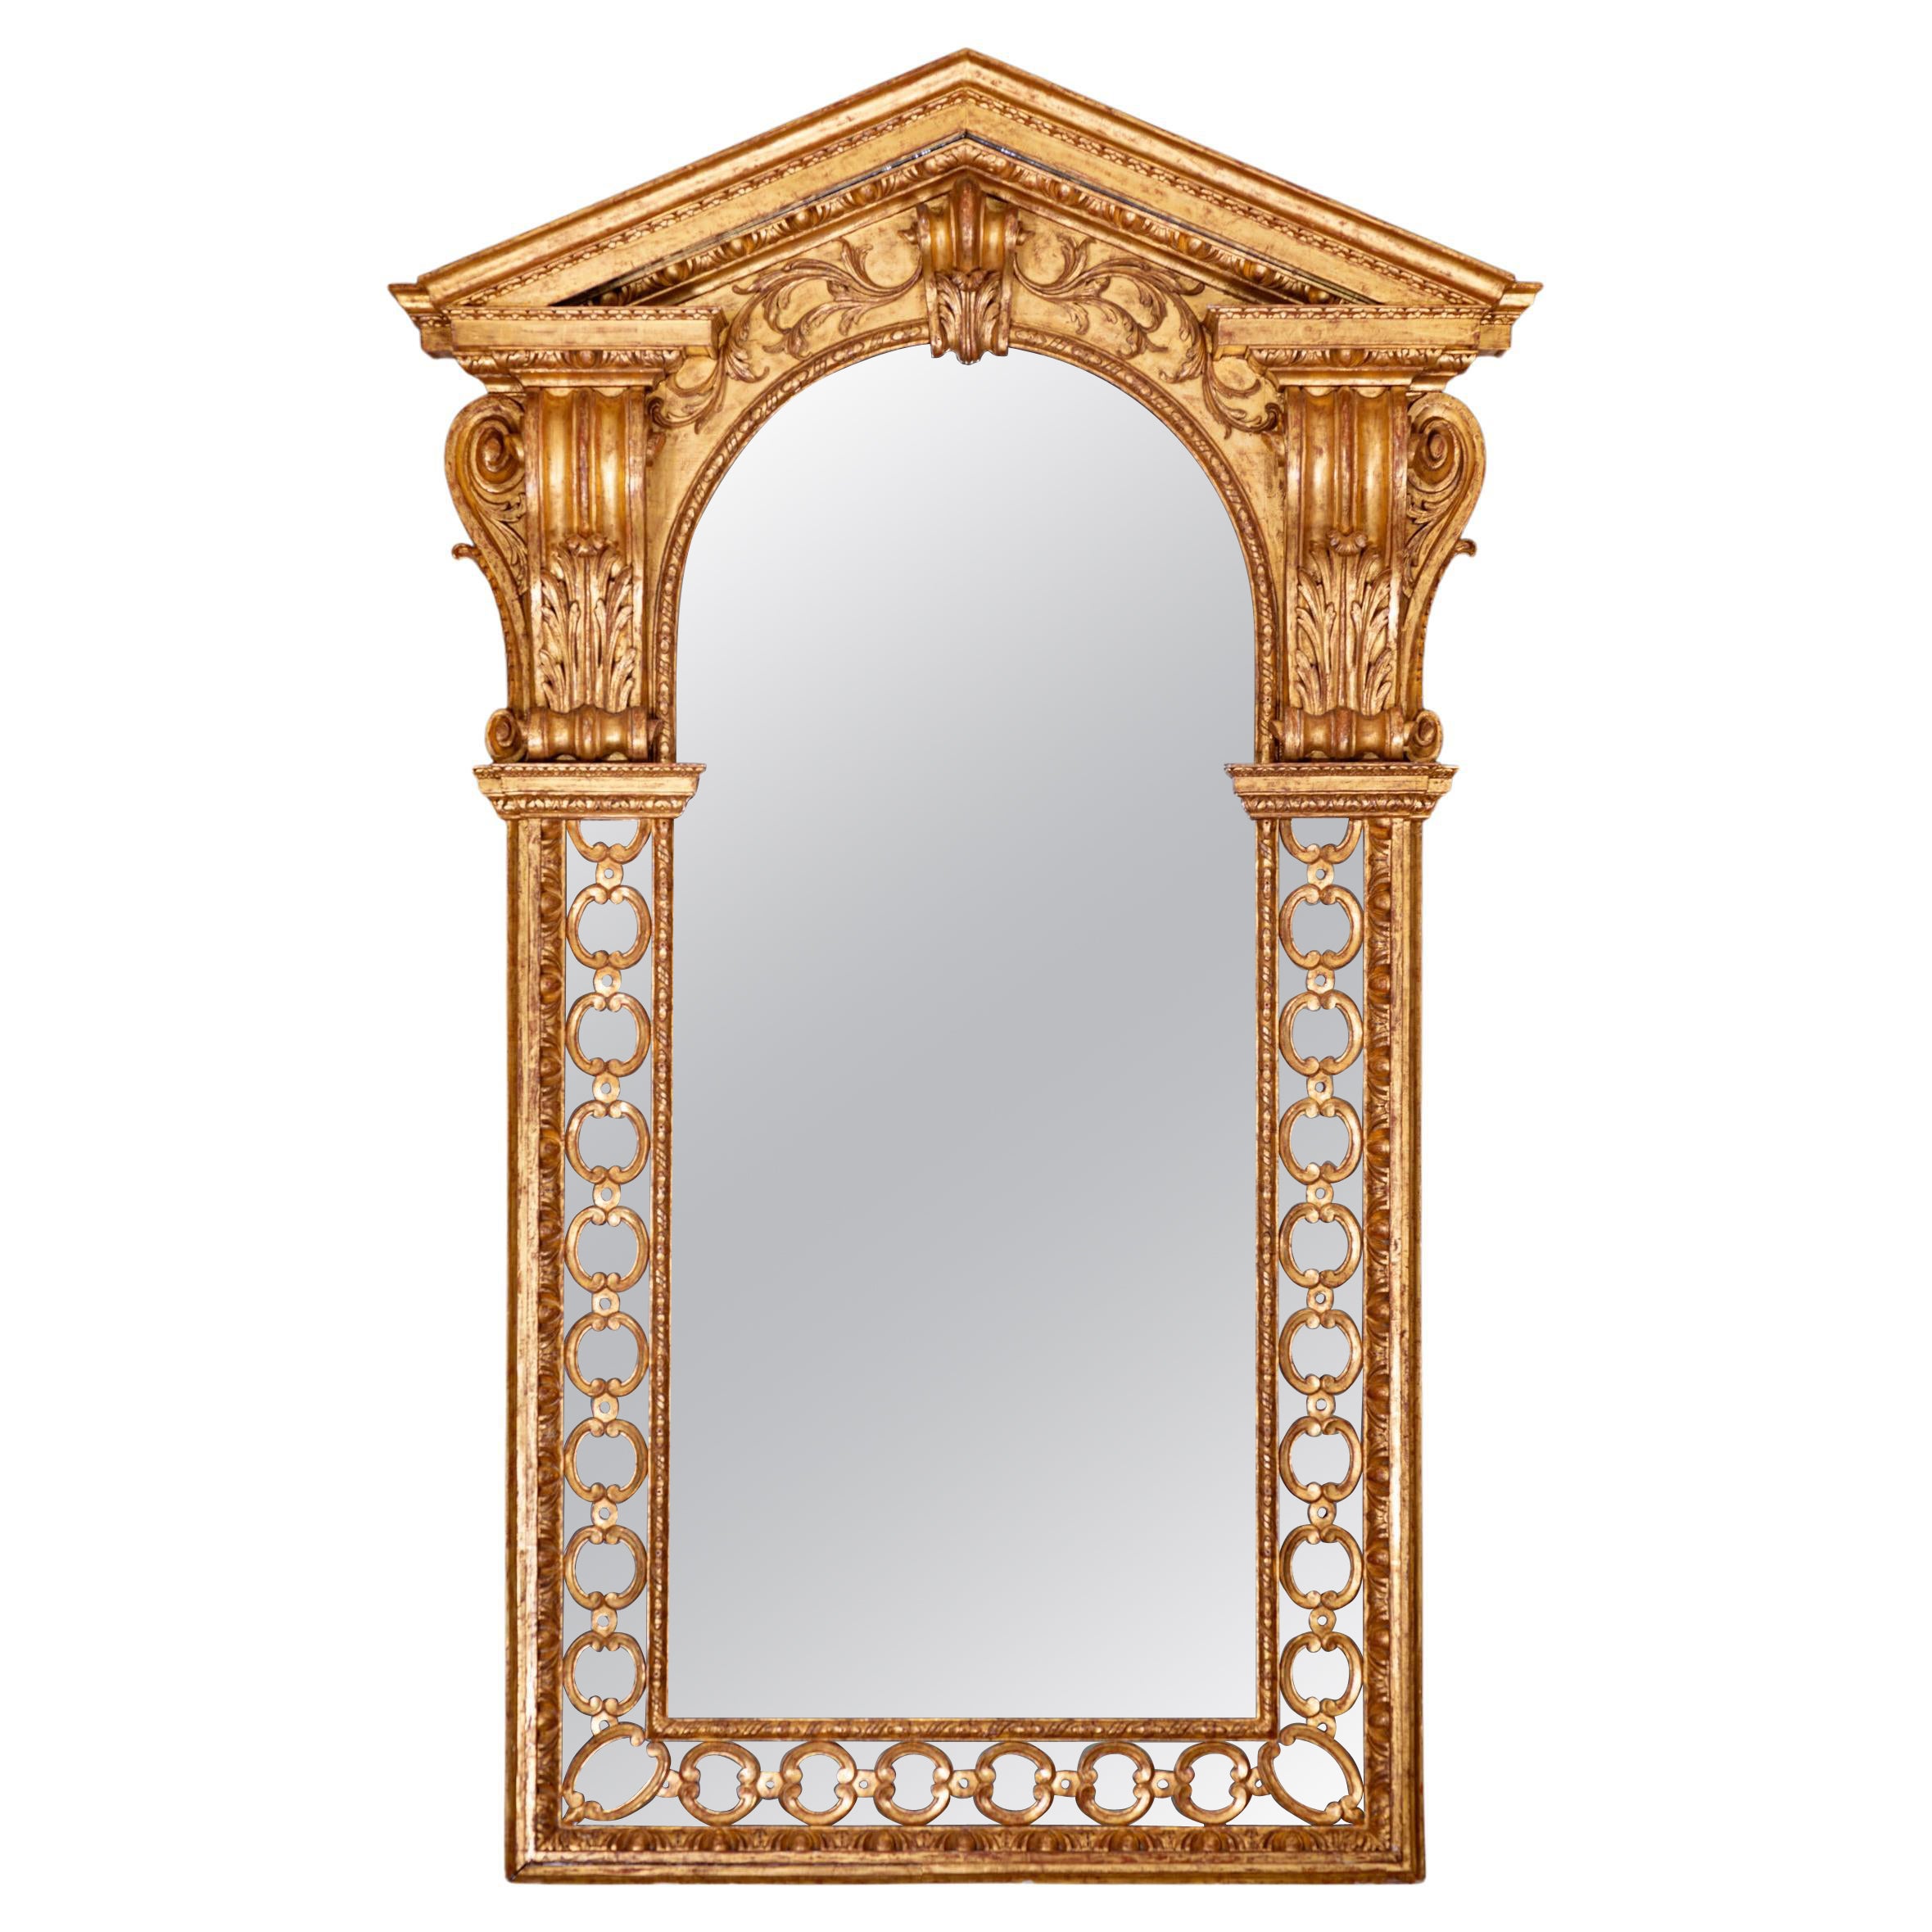 18th Century Irish Wall Mirror Attributed To John & Francis Booker Of Dublin For Sale